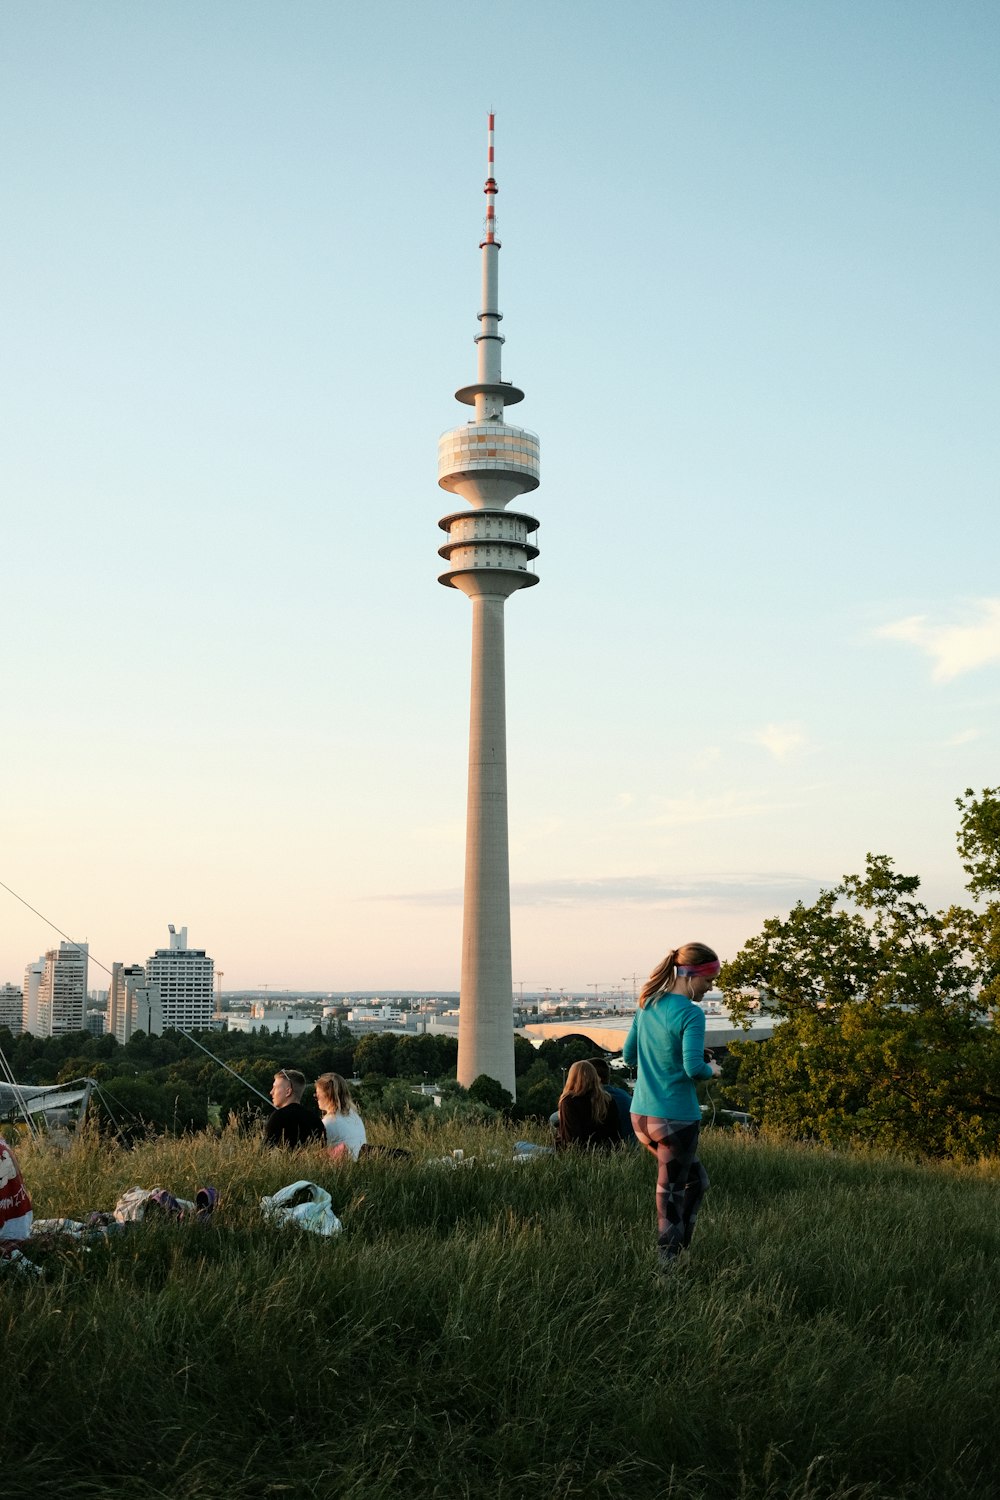 a tall tower in a park with Olympiaturm in the background